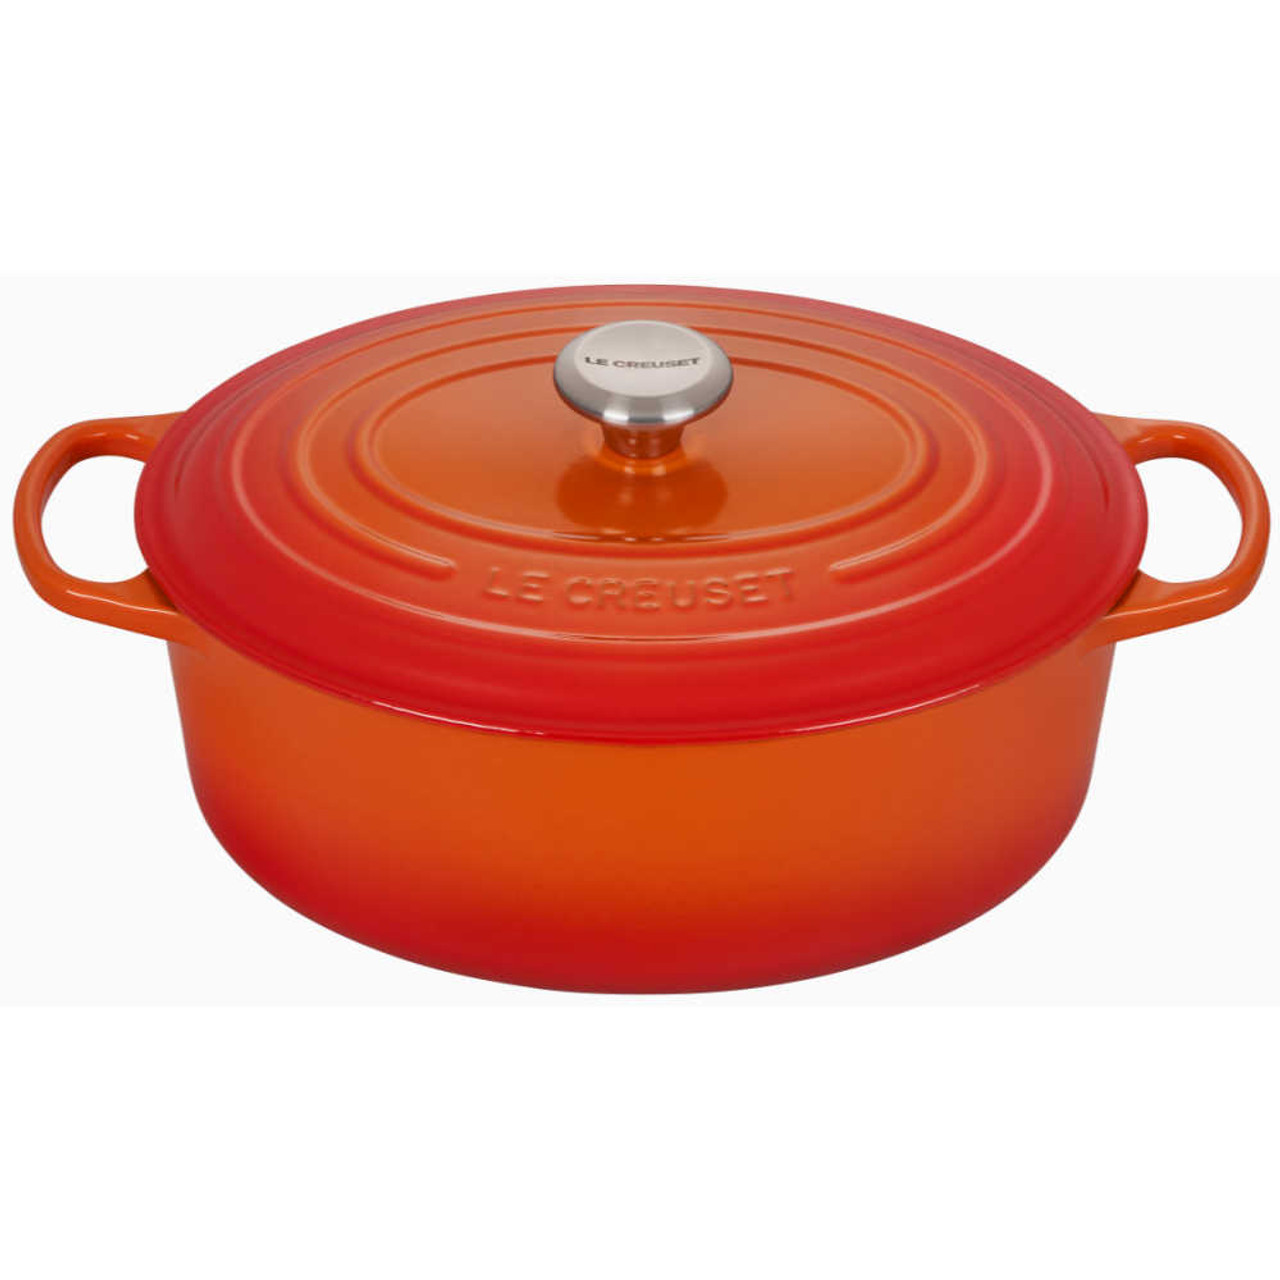 https://cdn11.bigcommerce.com/s-hccytny0od/images/stencil/1280x1280/products/3676/17561/Le_Creuset_Oval_Dutch_Oven_Flame__19136.1639706476.jpg?c=2?imbypass=on